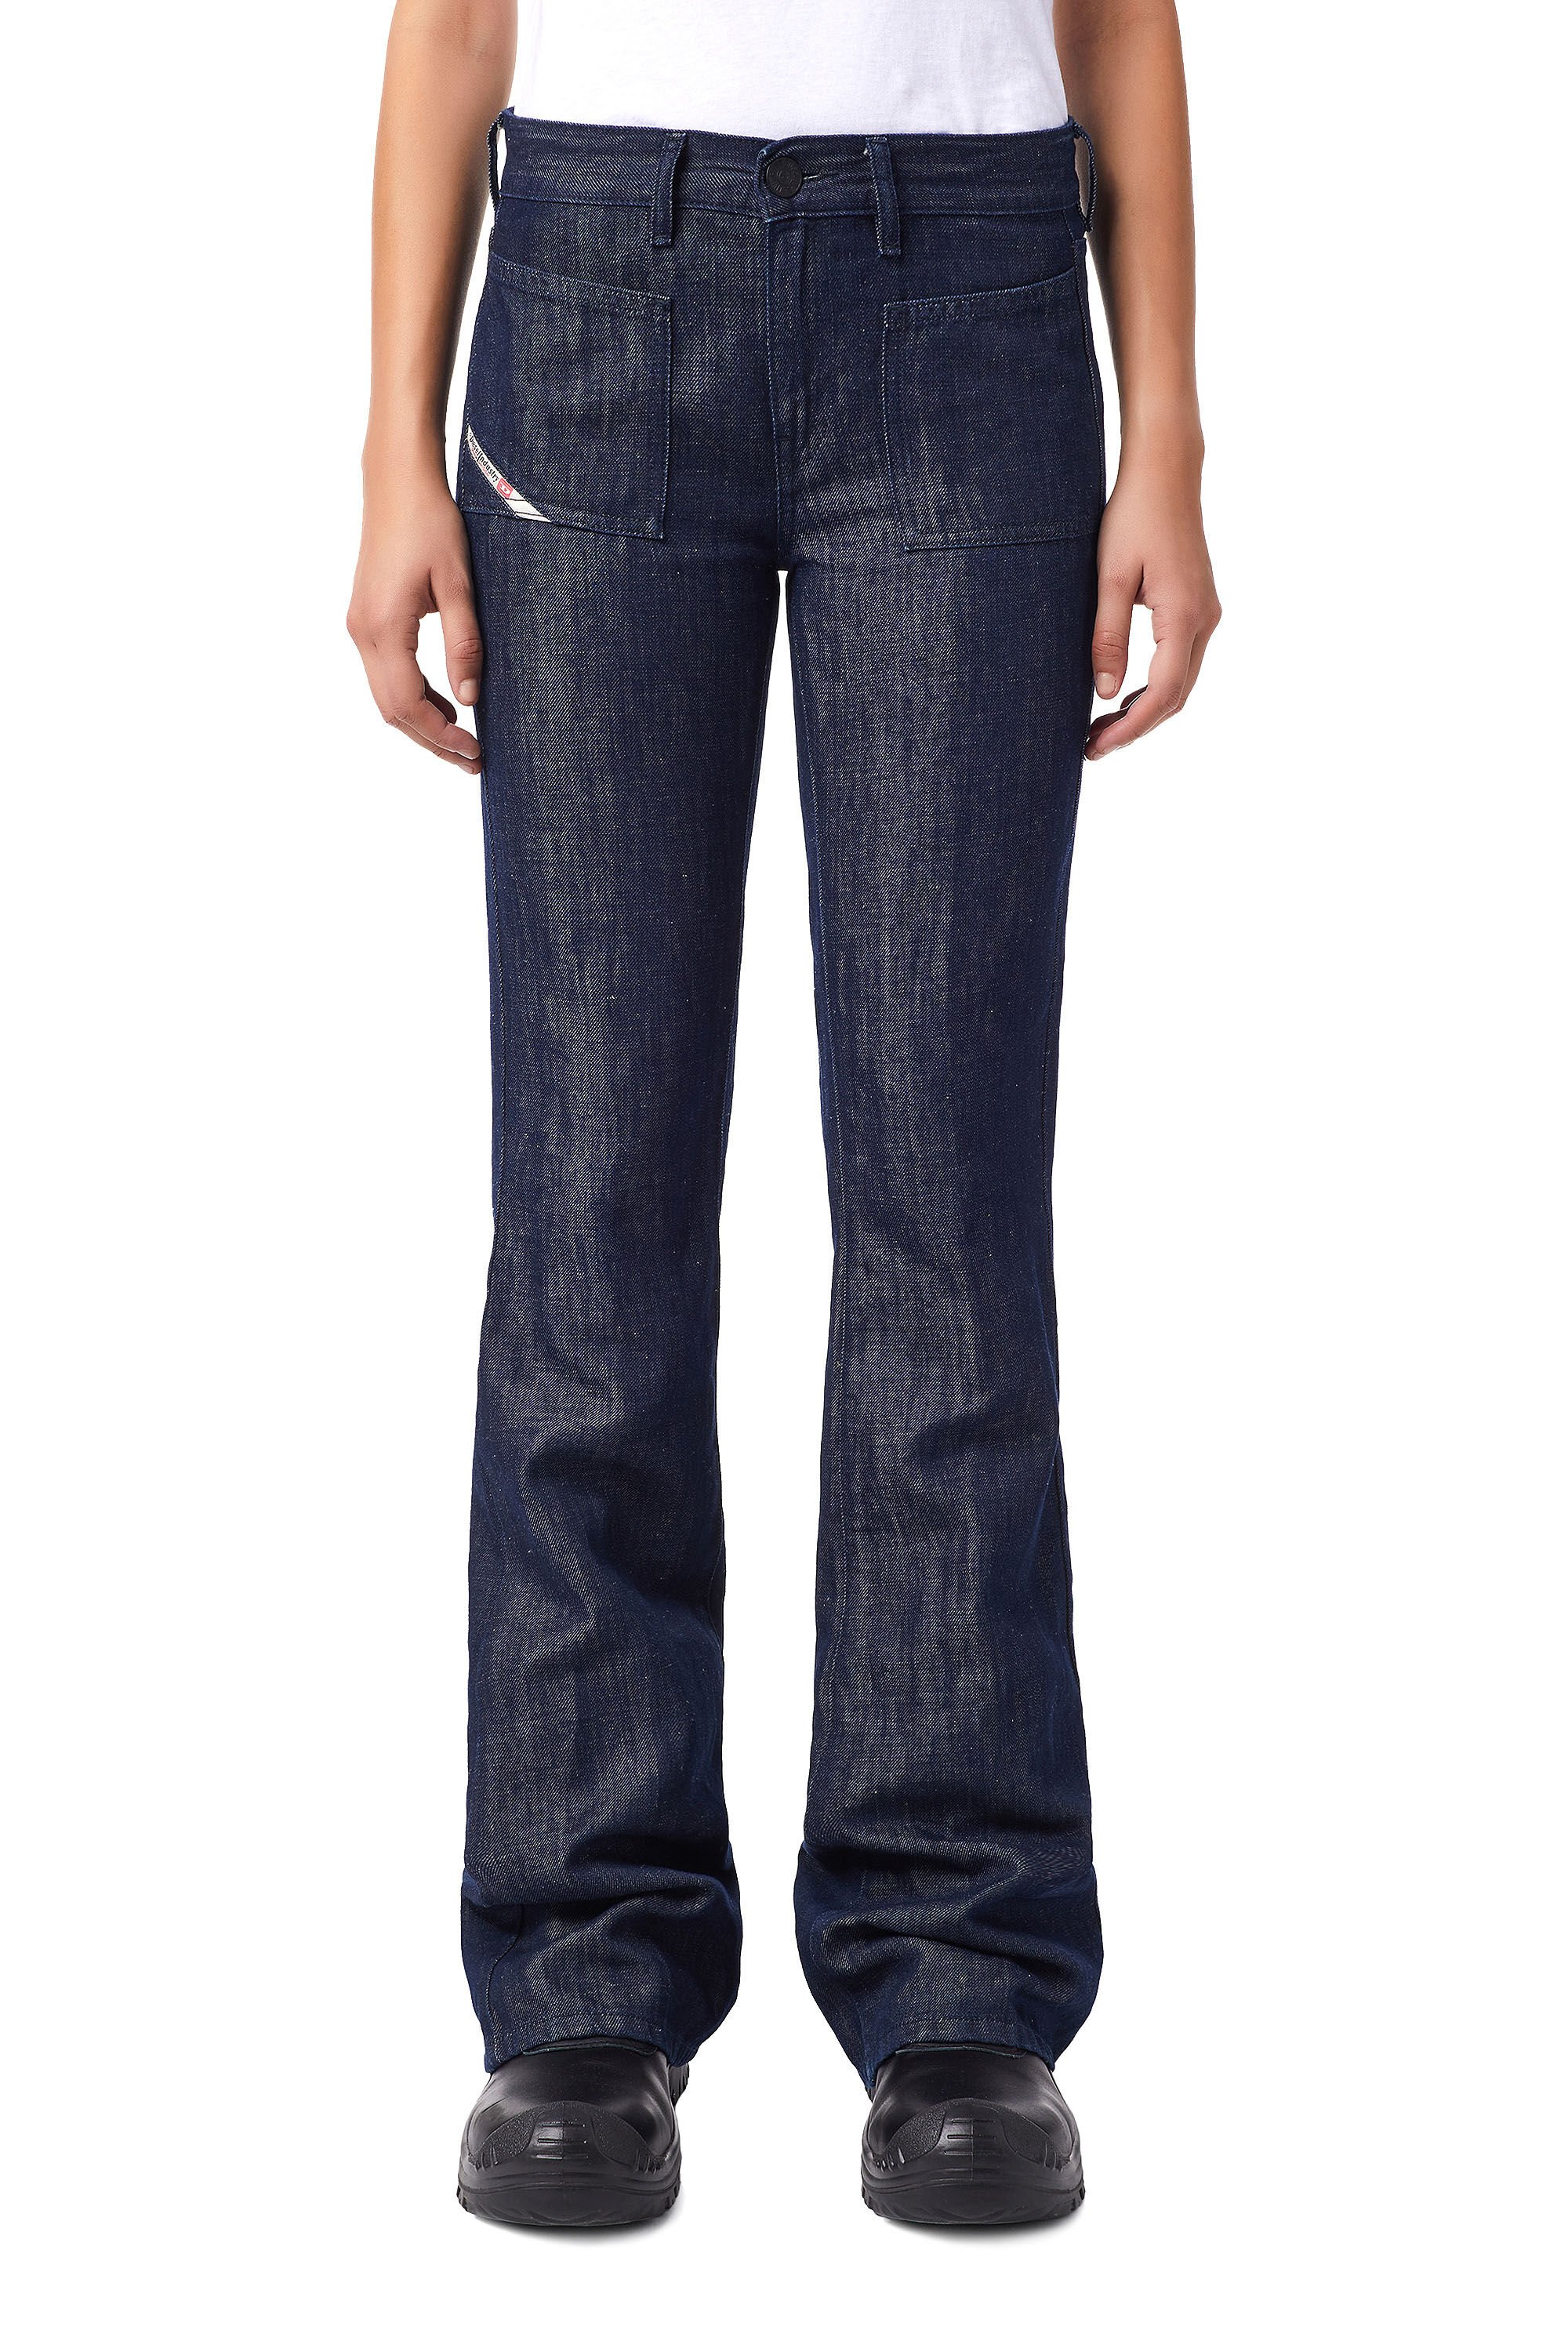 Diesel - 1969 D-EBBEY Z9B15 Bootcut and Flare Jeans,  - Image 3